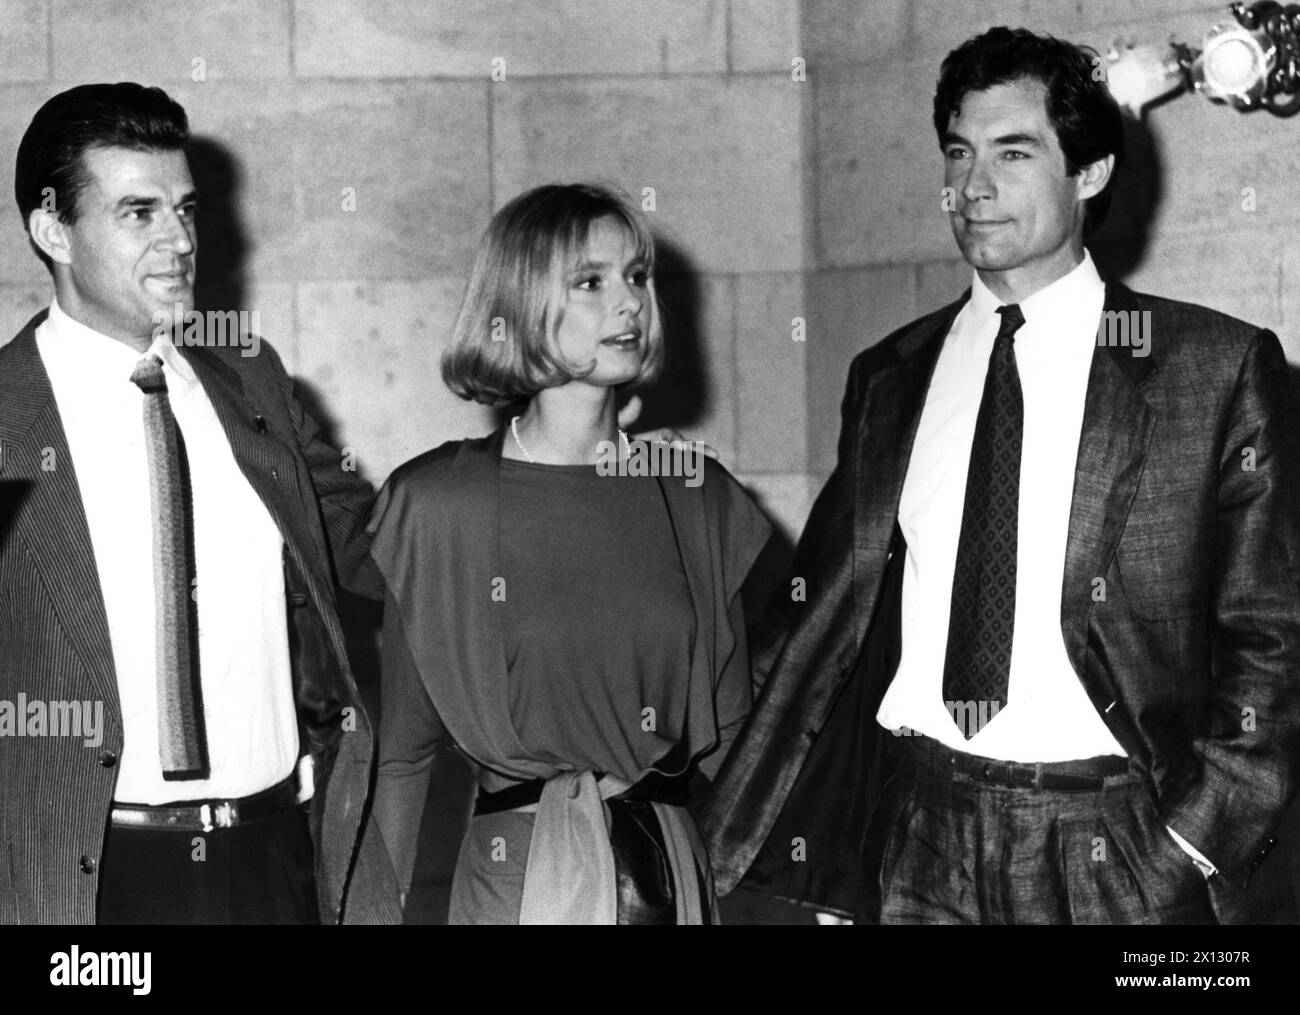 Vienna, on October 5th 1986: The new 'James Bond', Timothy Dalton, was presented in the townhall of Vienna, Austria. Picture: (L.t.r.) Actor Jeroen Krabbe (Netherlands), who will personify a KGB-Commander named Koskov; Maryam d'Abo, who will represent 'Kara', a Czechoslovakian cellist; and the new '007', Timothy Dalton, a British actor with international reputation. - 19861005 PD0006 - Rechteinfo: Rights Managed (RM) Stock Photo